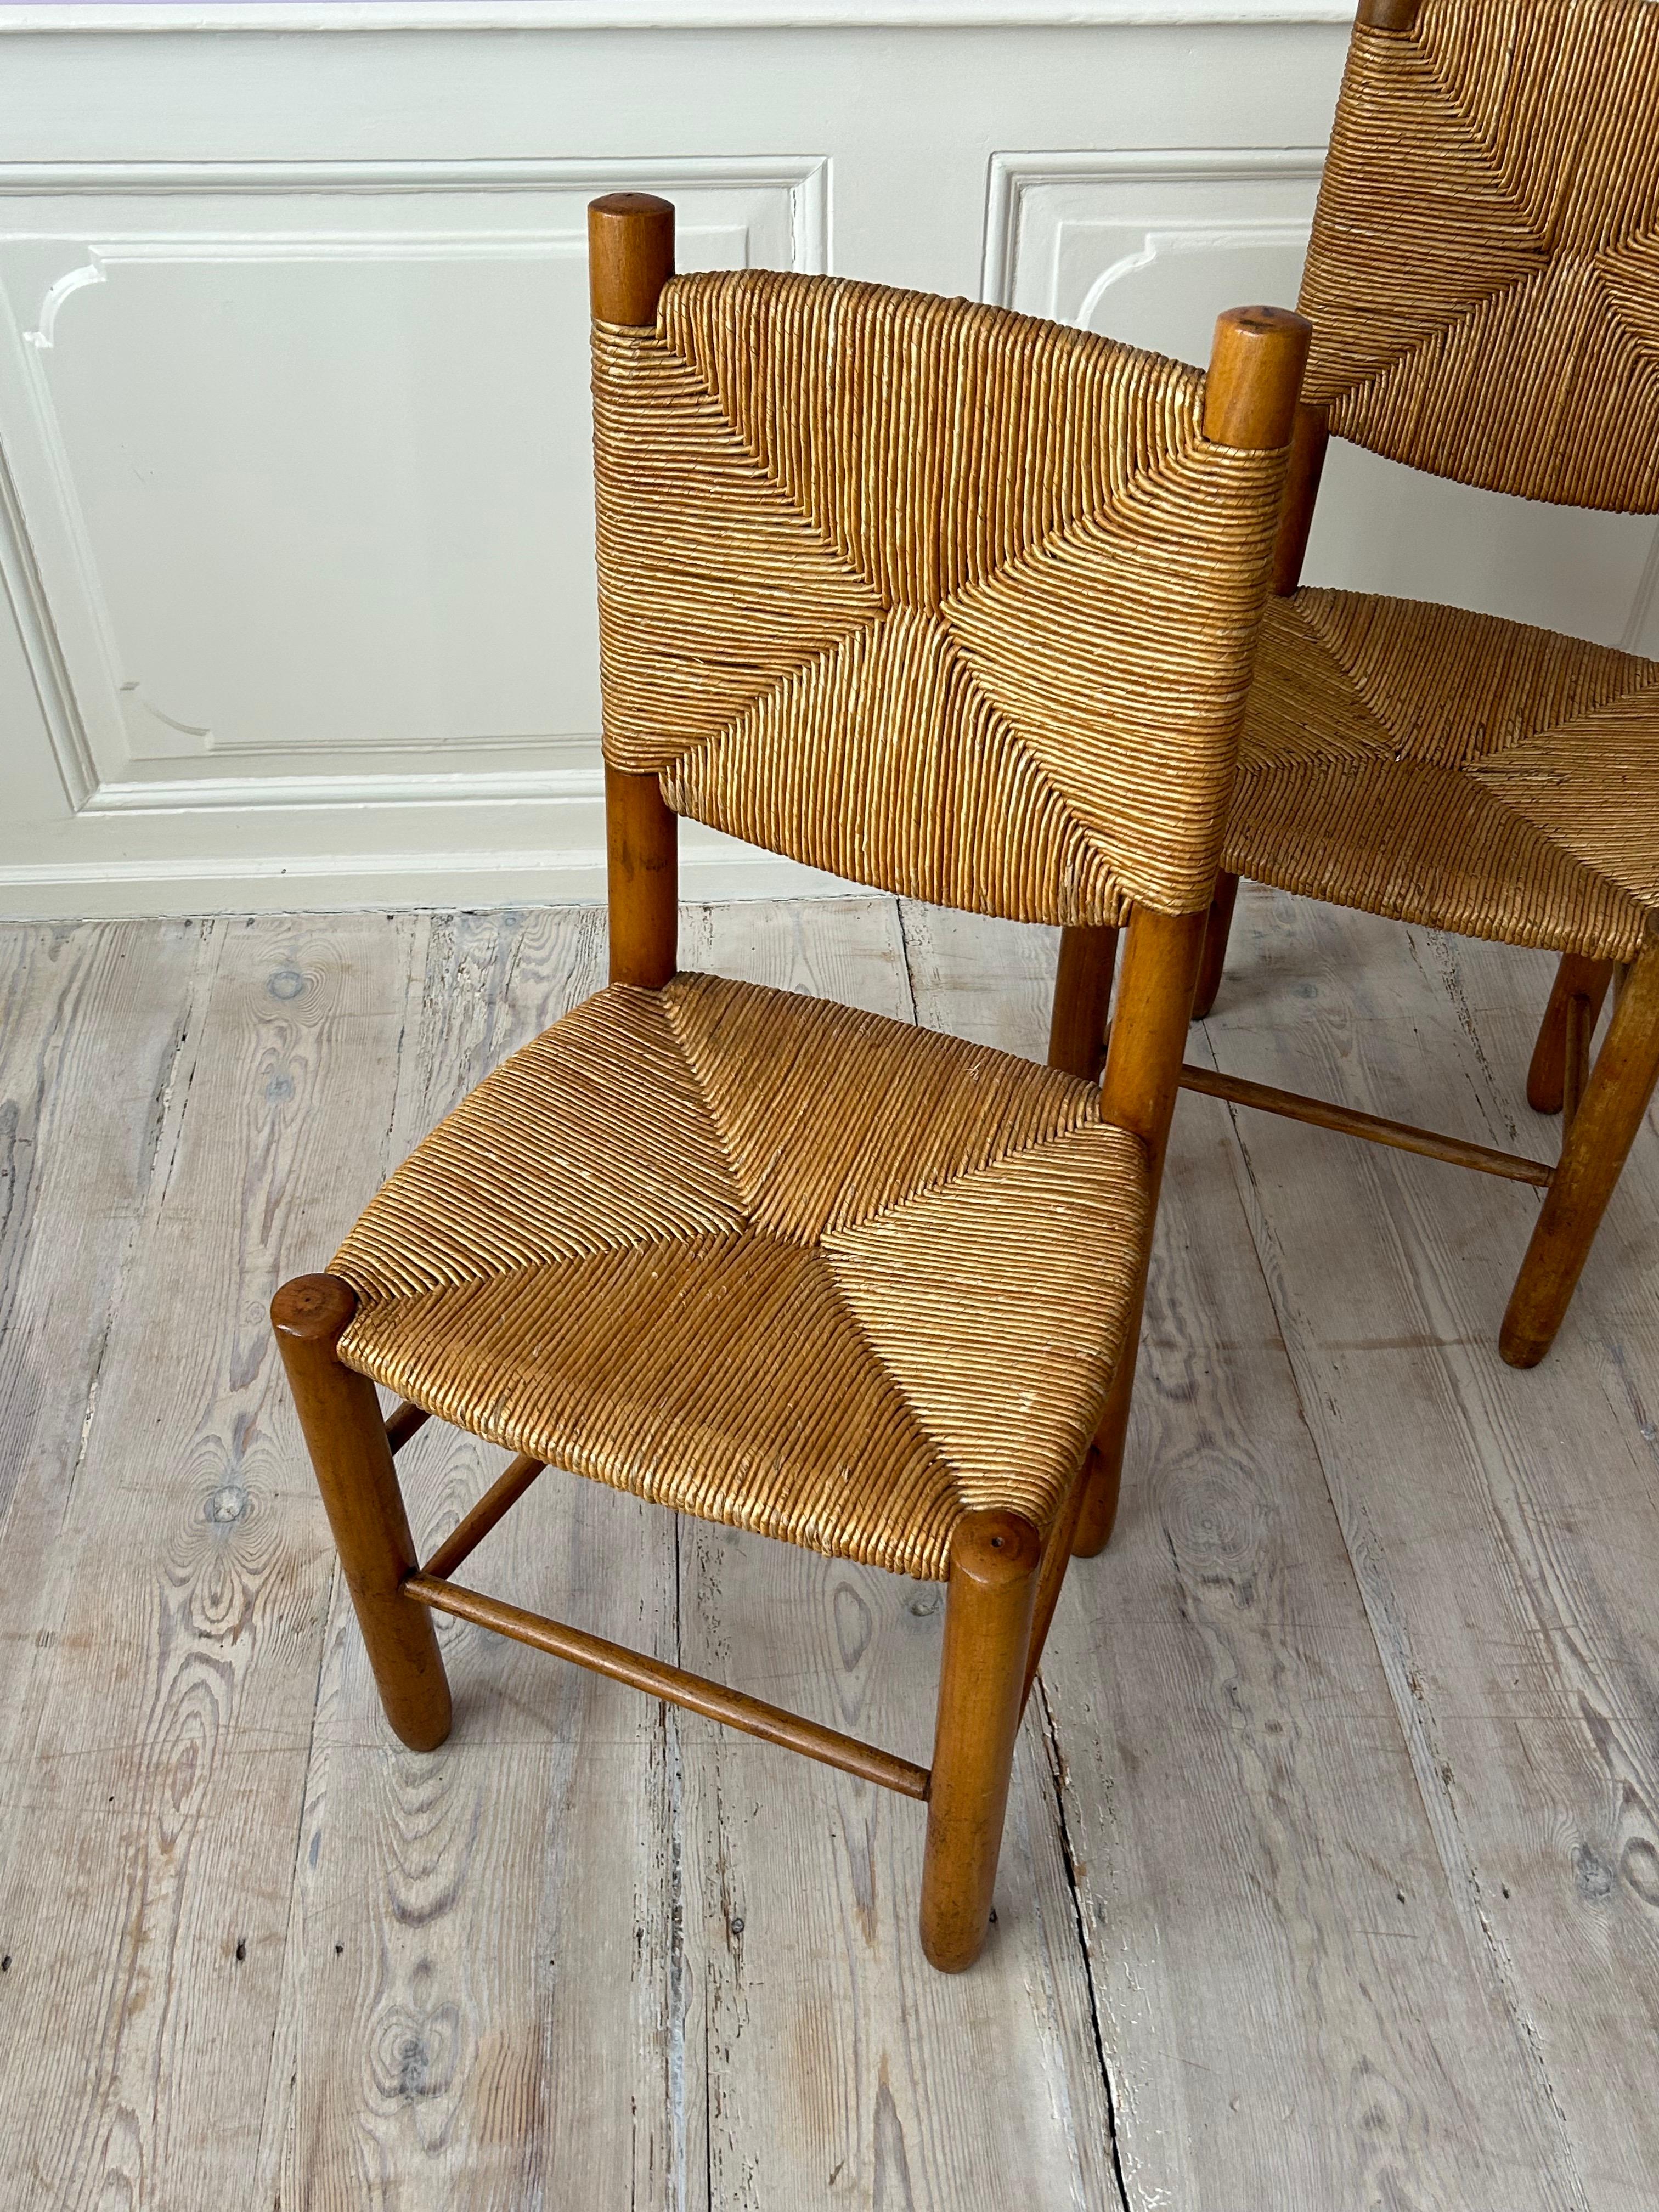 Vintage Set of Four Chairs in Ash and Straw, France, 1950s For Sale 2